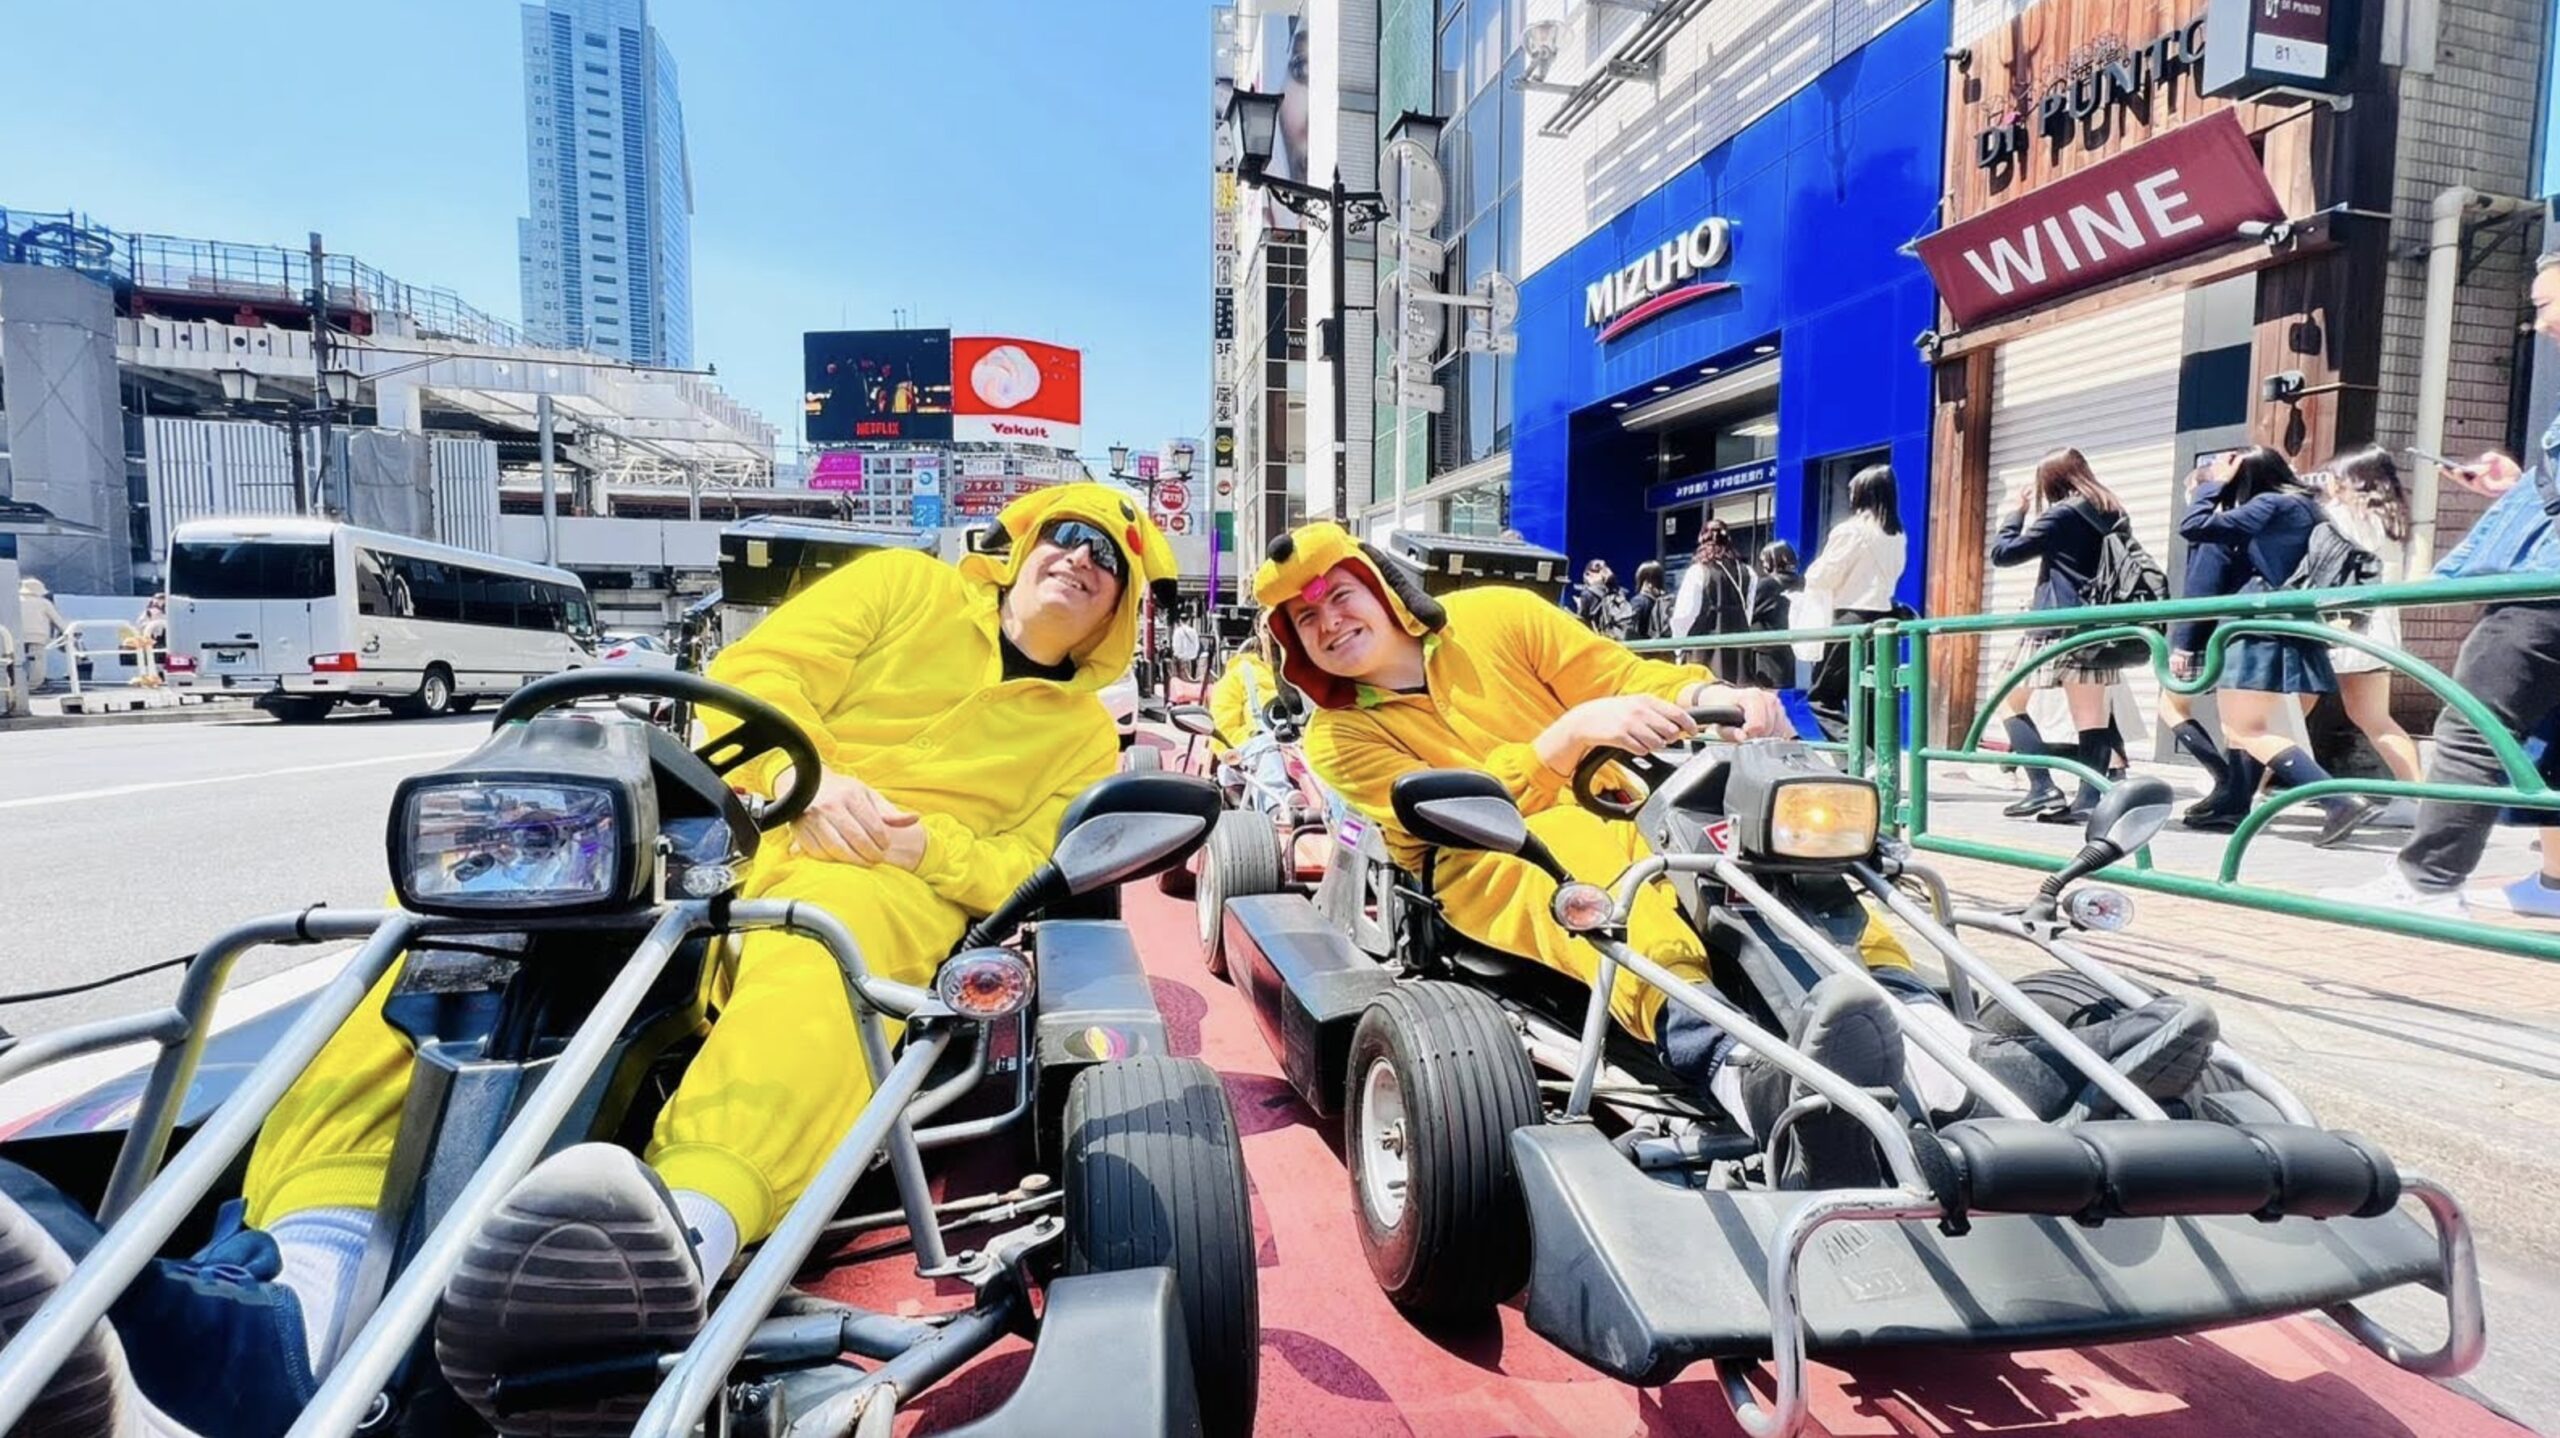 real-life-mario-kart-street-tokyo-review - Points with a Crew